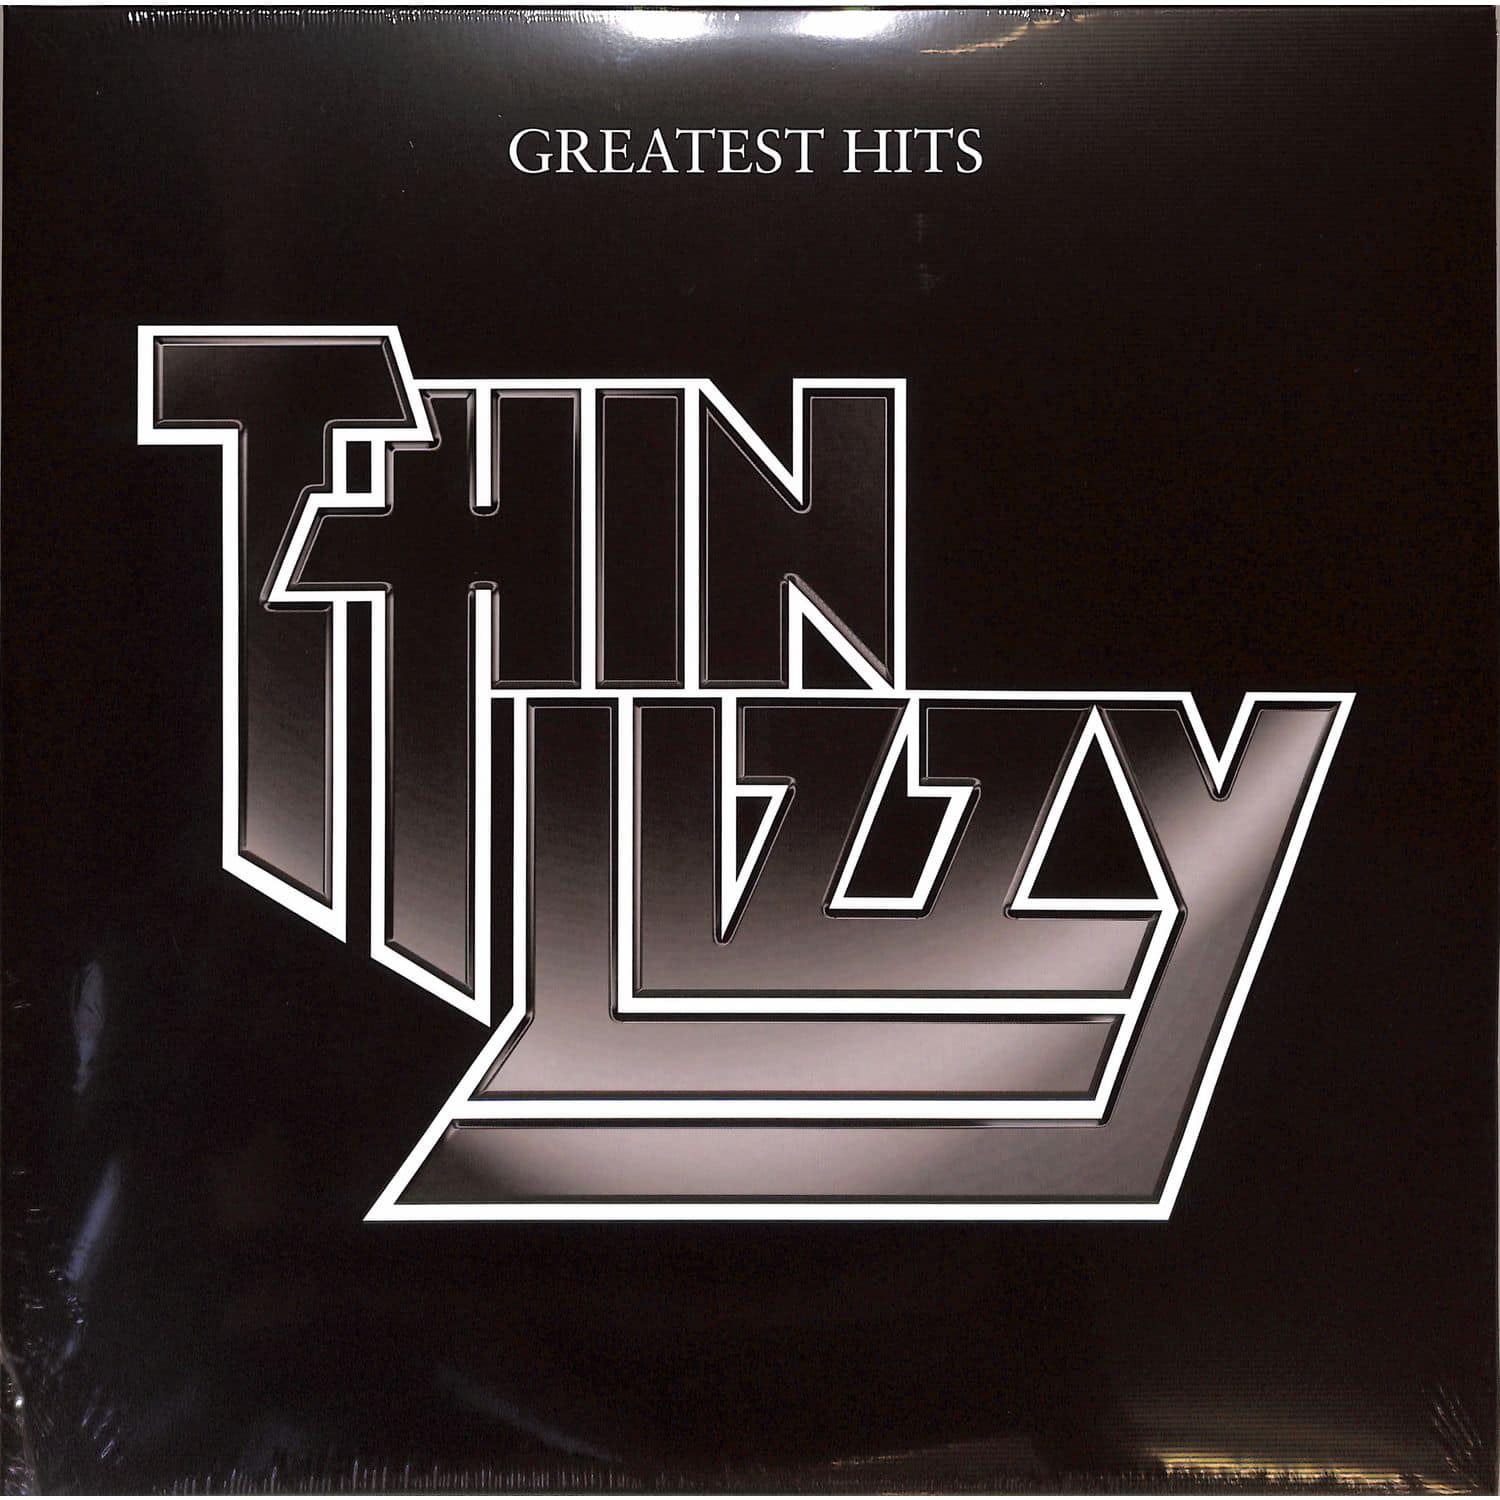 Thin Lizzy - GREATEST HITS 